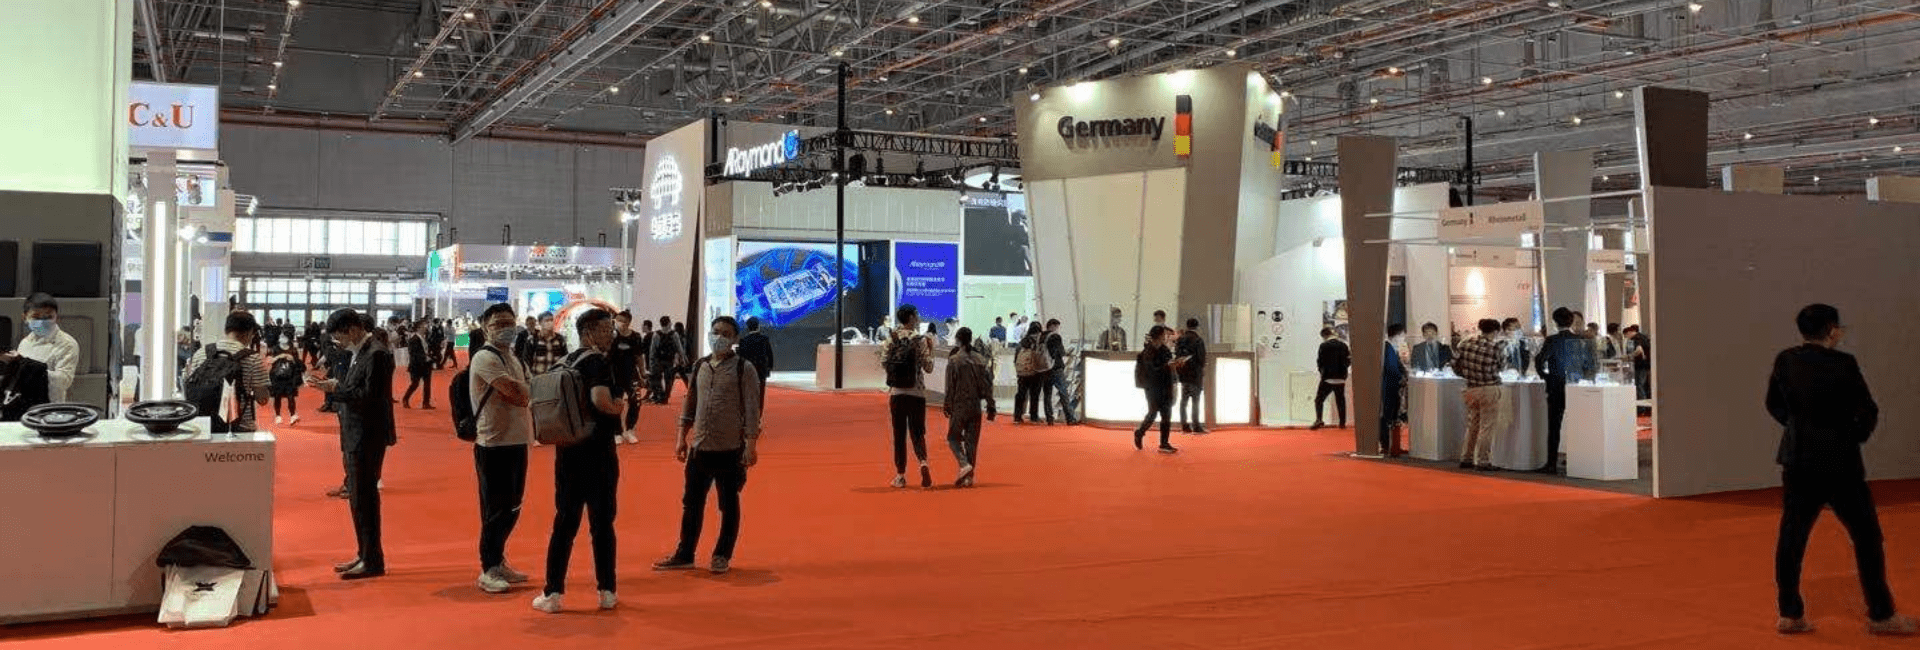 OLED Lighting Makes a Splash at Auto Shanghai 2021 Conference